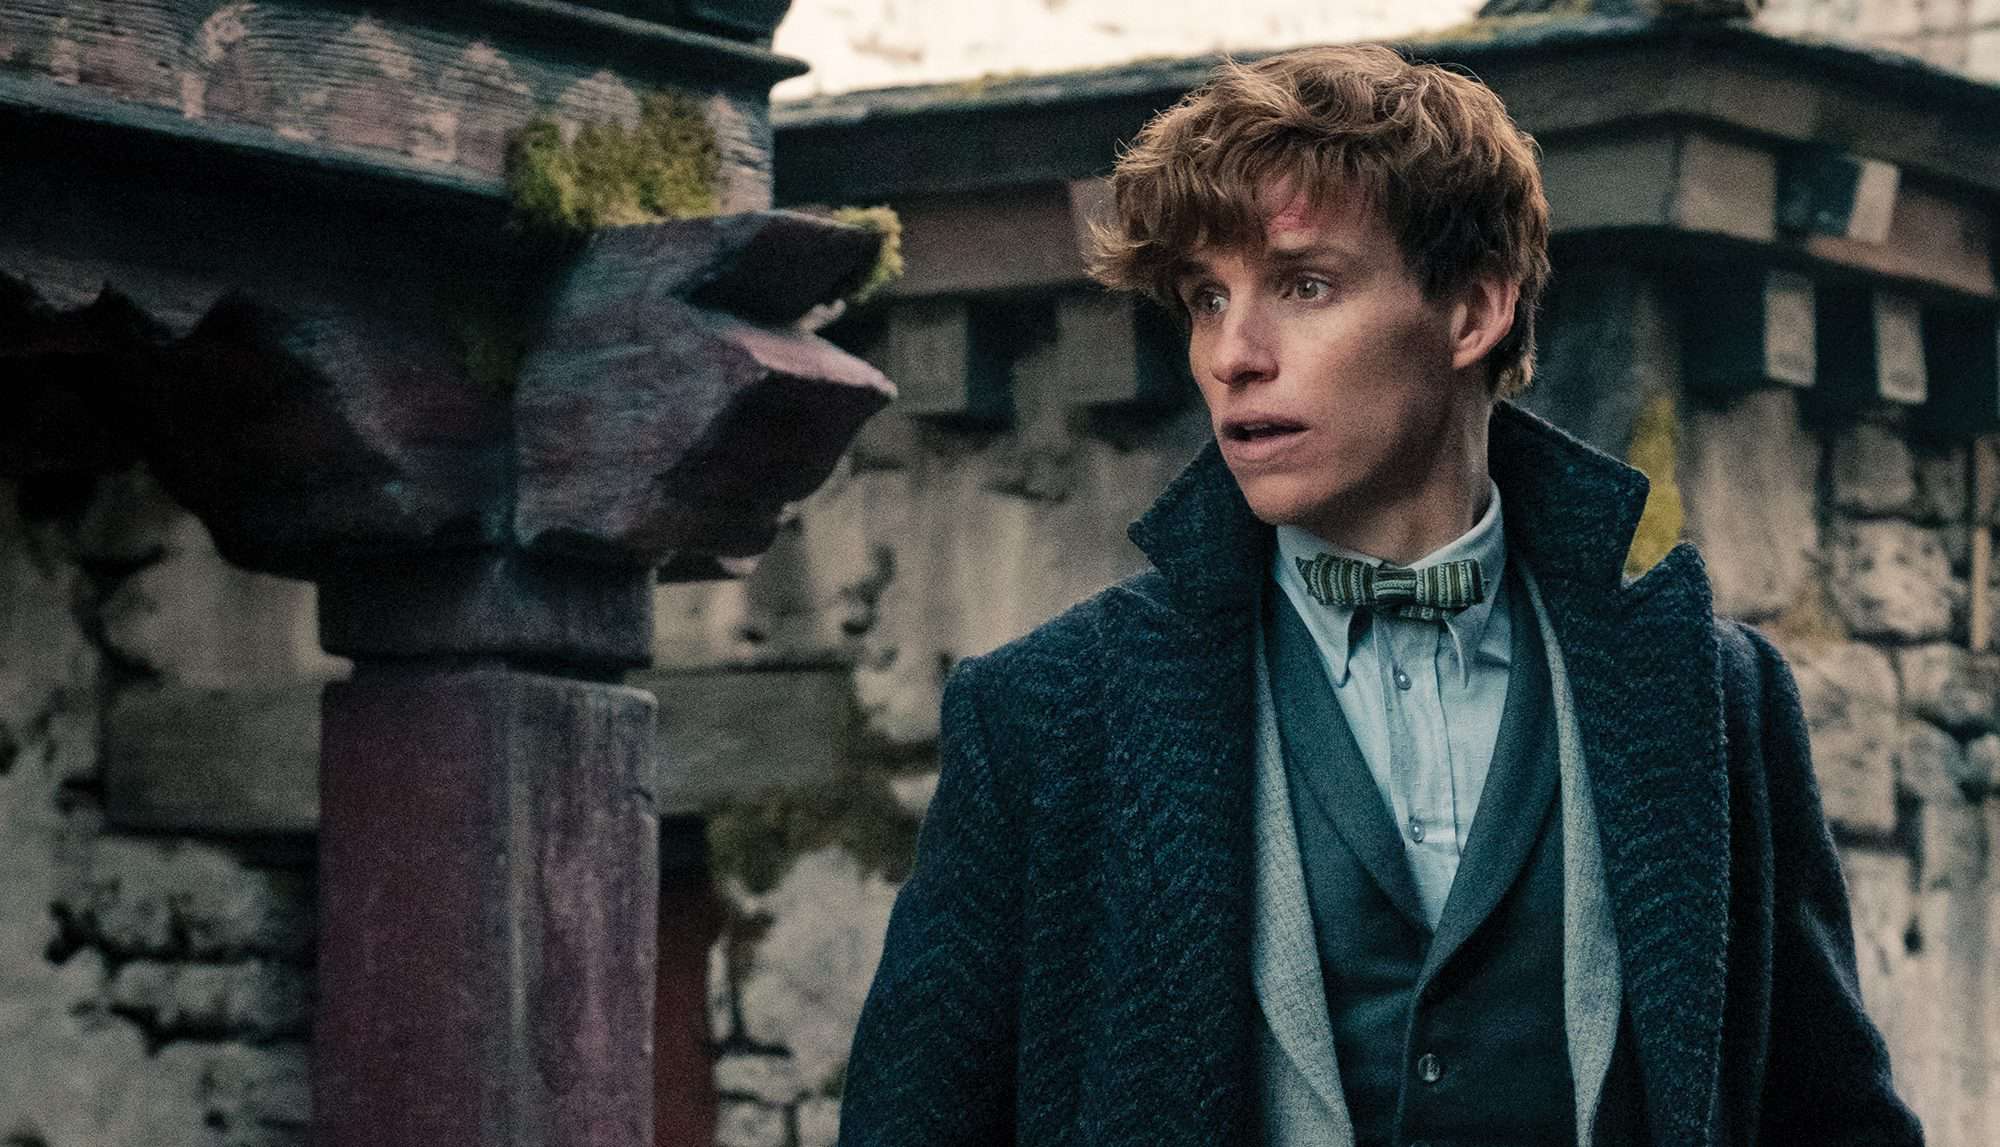 Newt Scamander (Fantastic Beasts and Where To Find Them)